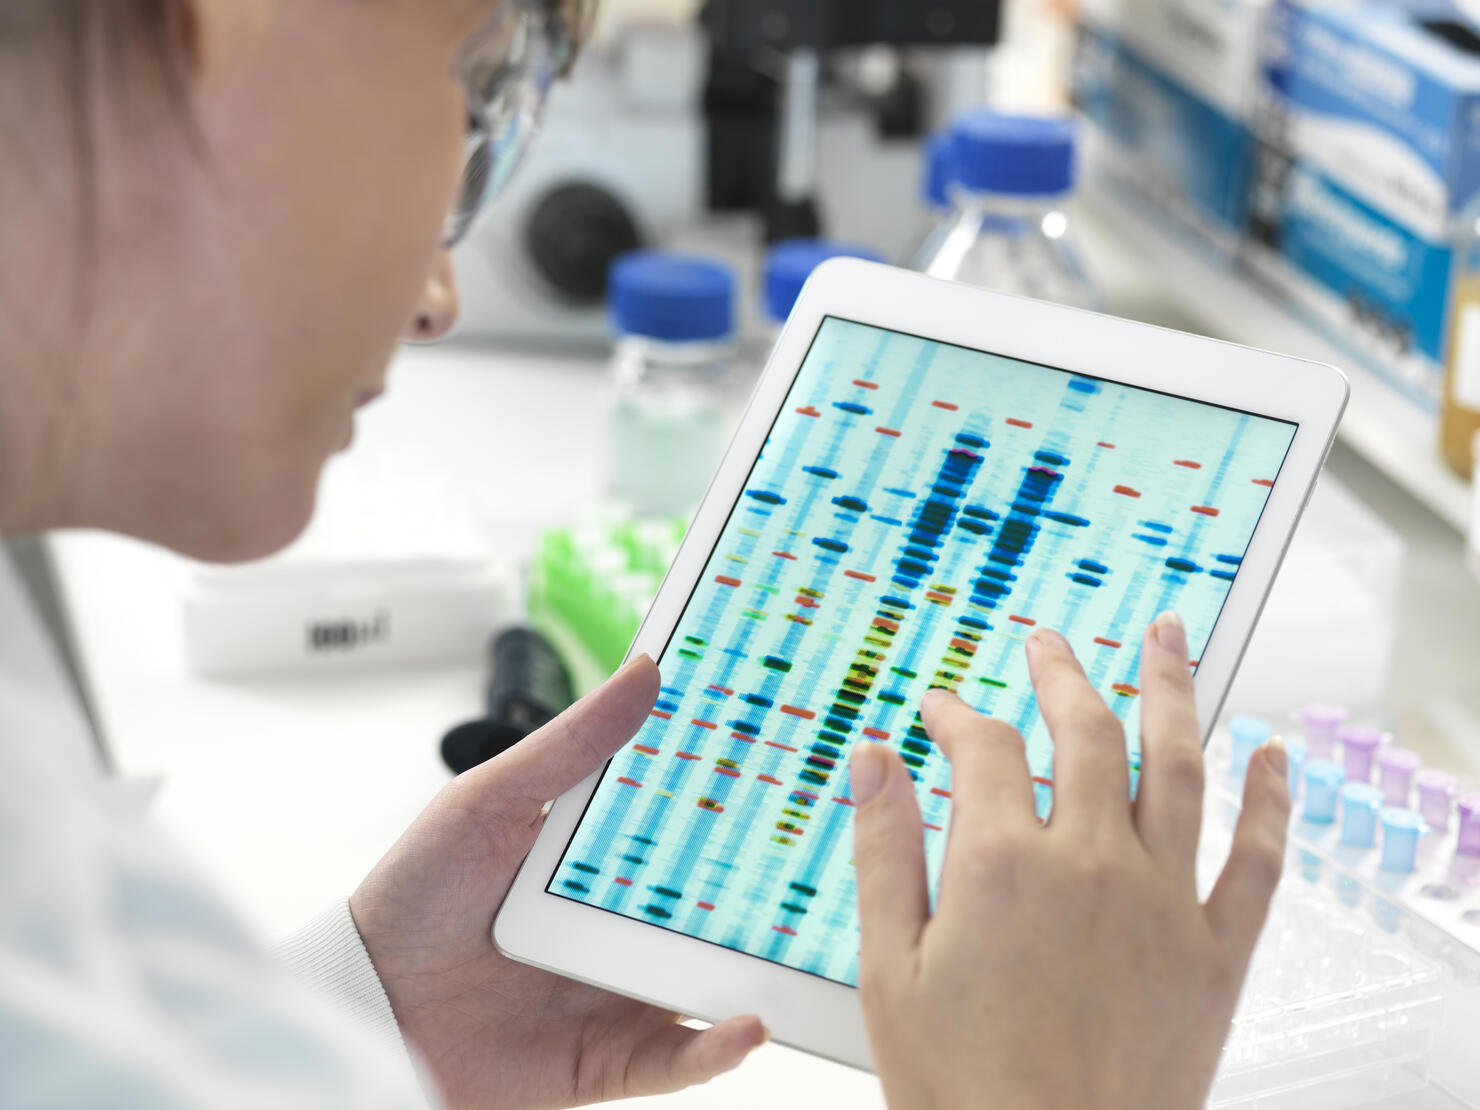 Female scientist examining DNA sequence results on digital tablet in laboratory